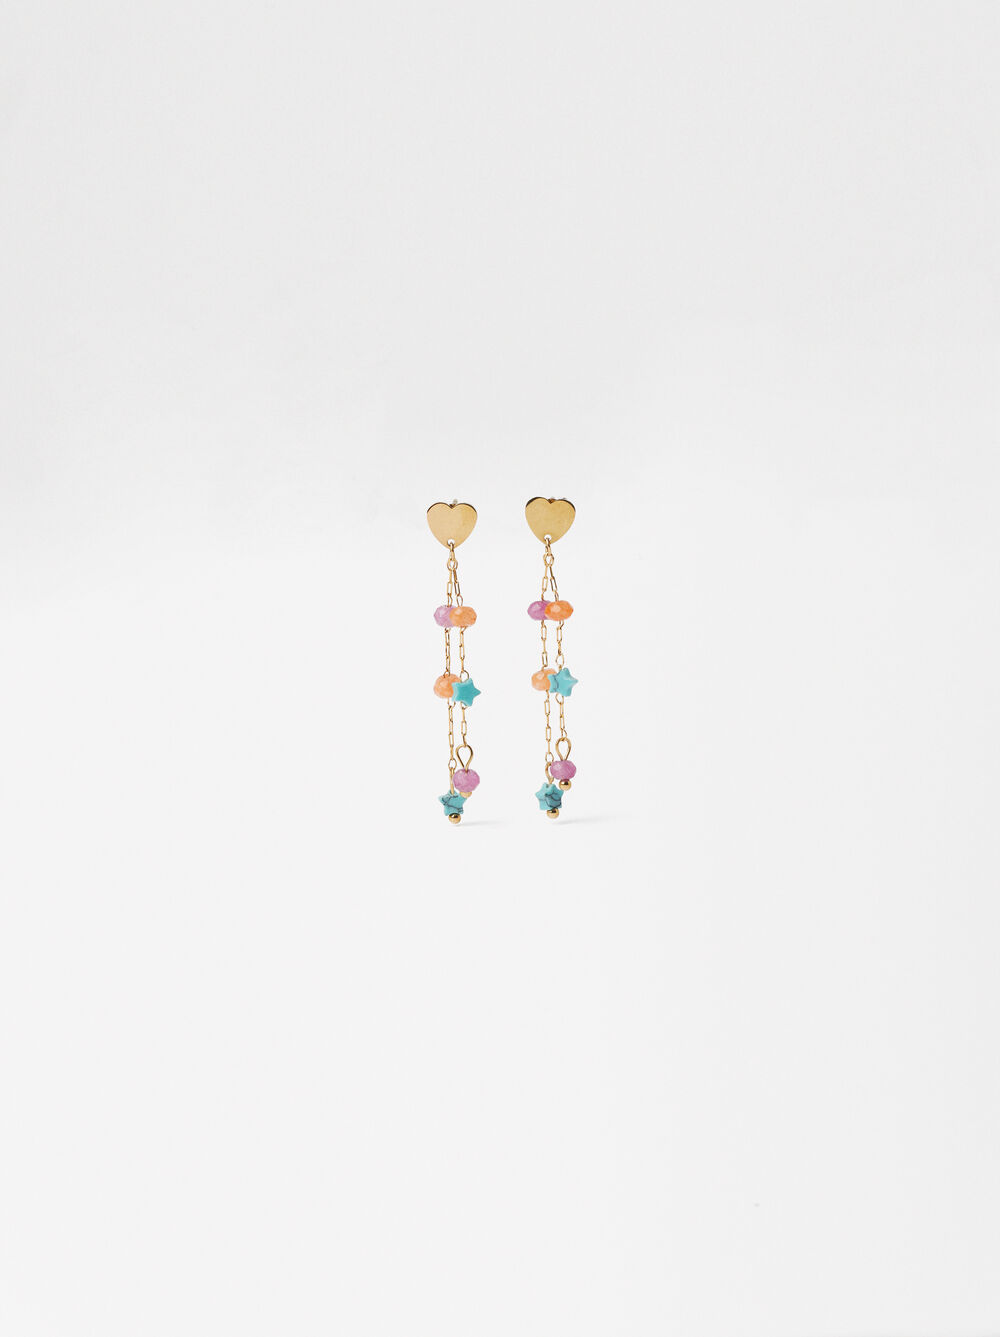 Stainless Steel Long Earrings With Stones